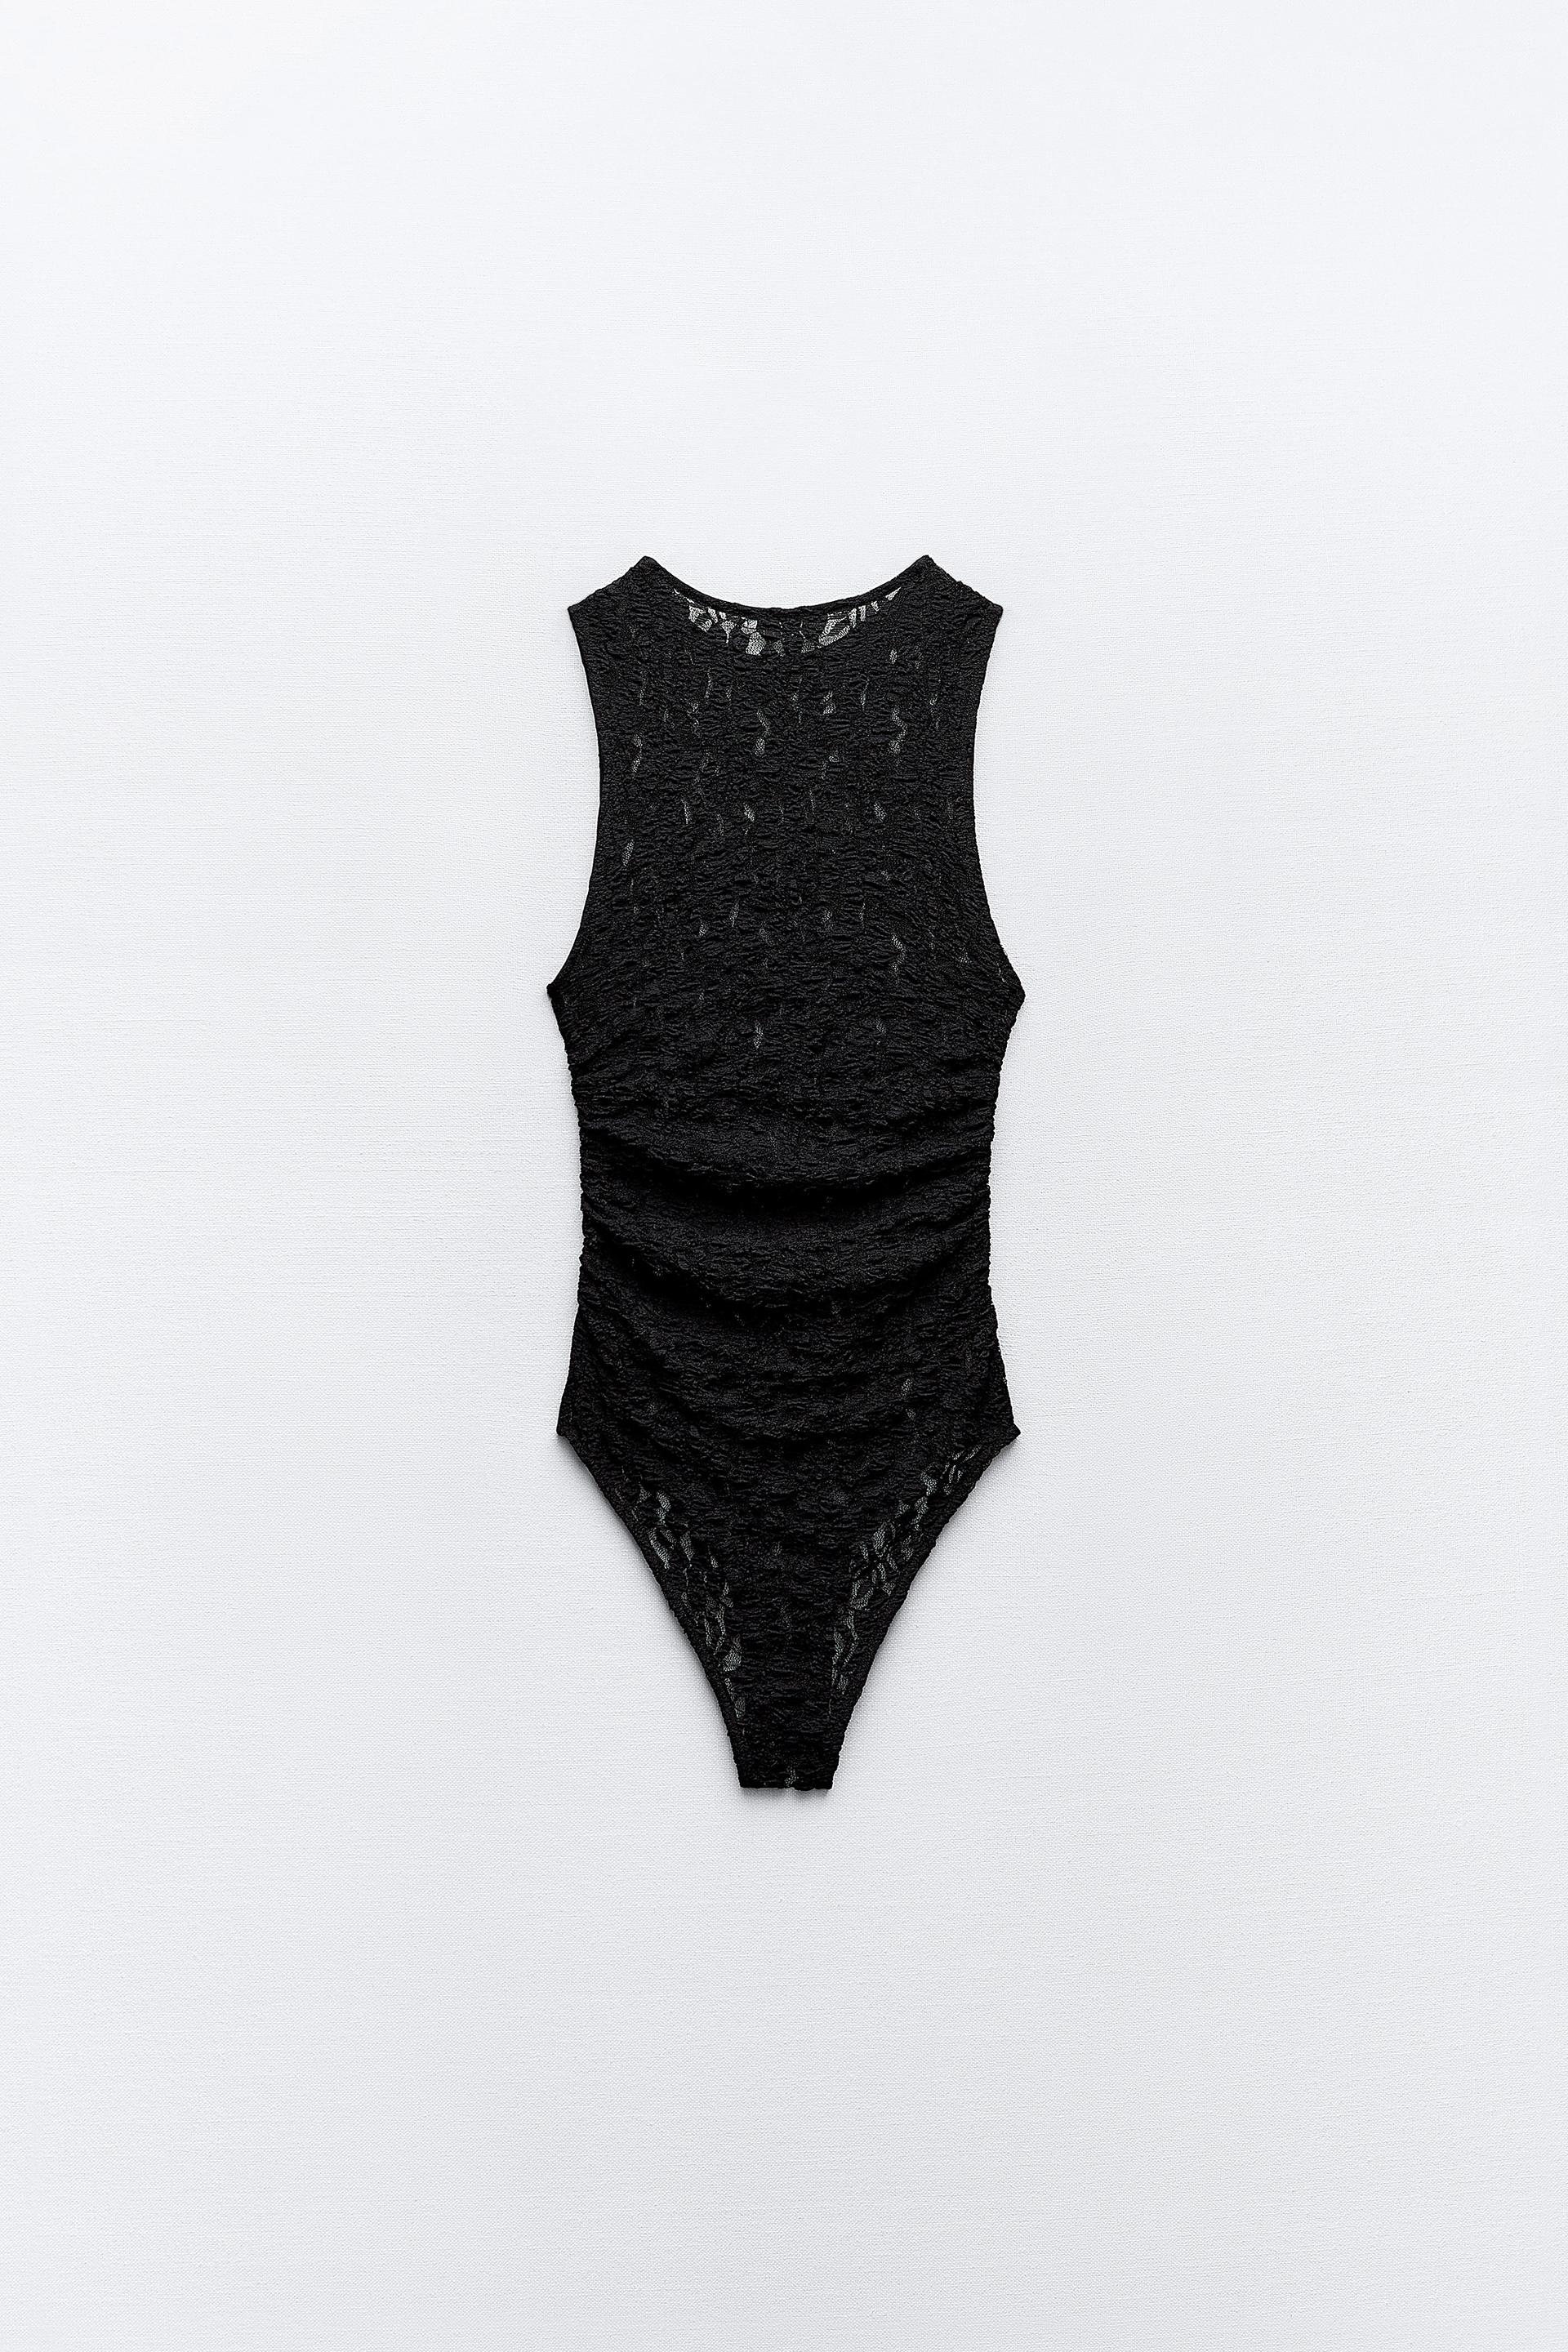 Sewing & Craft, Sale - Zara - Lace Bodysuit top - Very Sexy